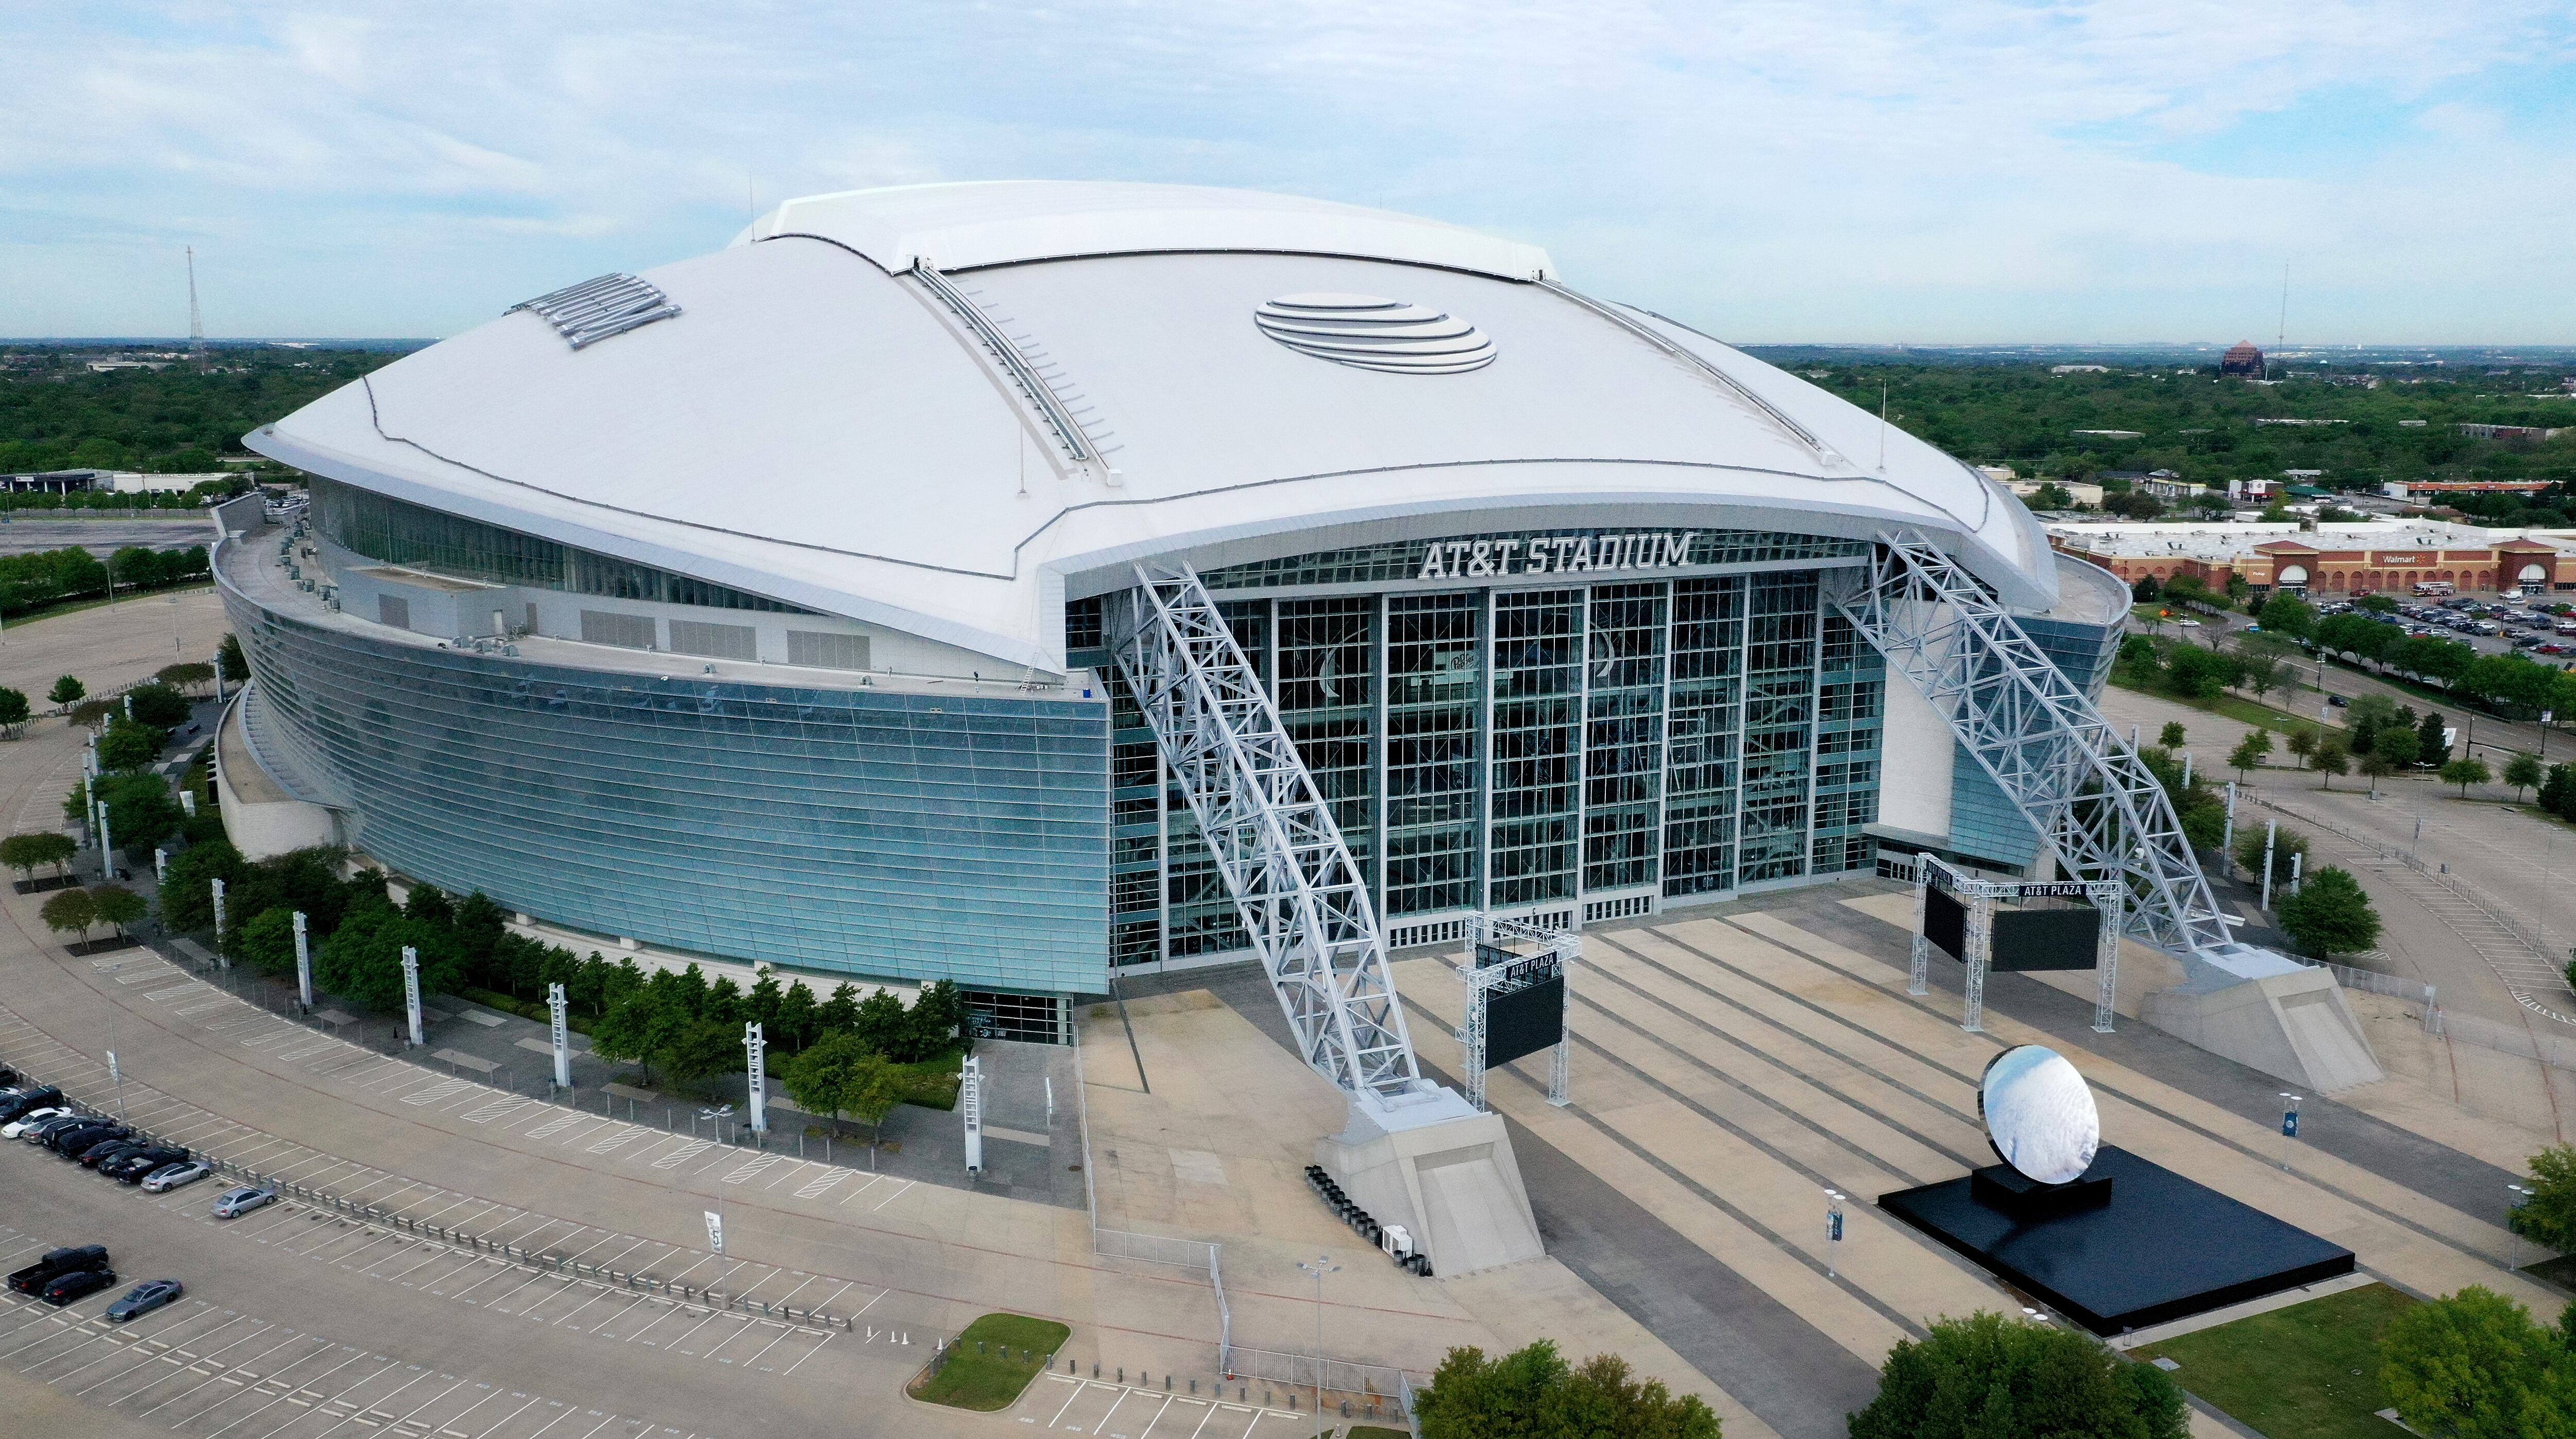 AT&T Stadium, with capacity for 80,000 spectators.